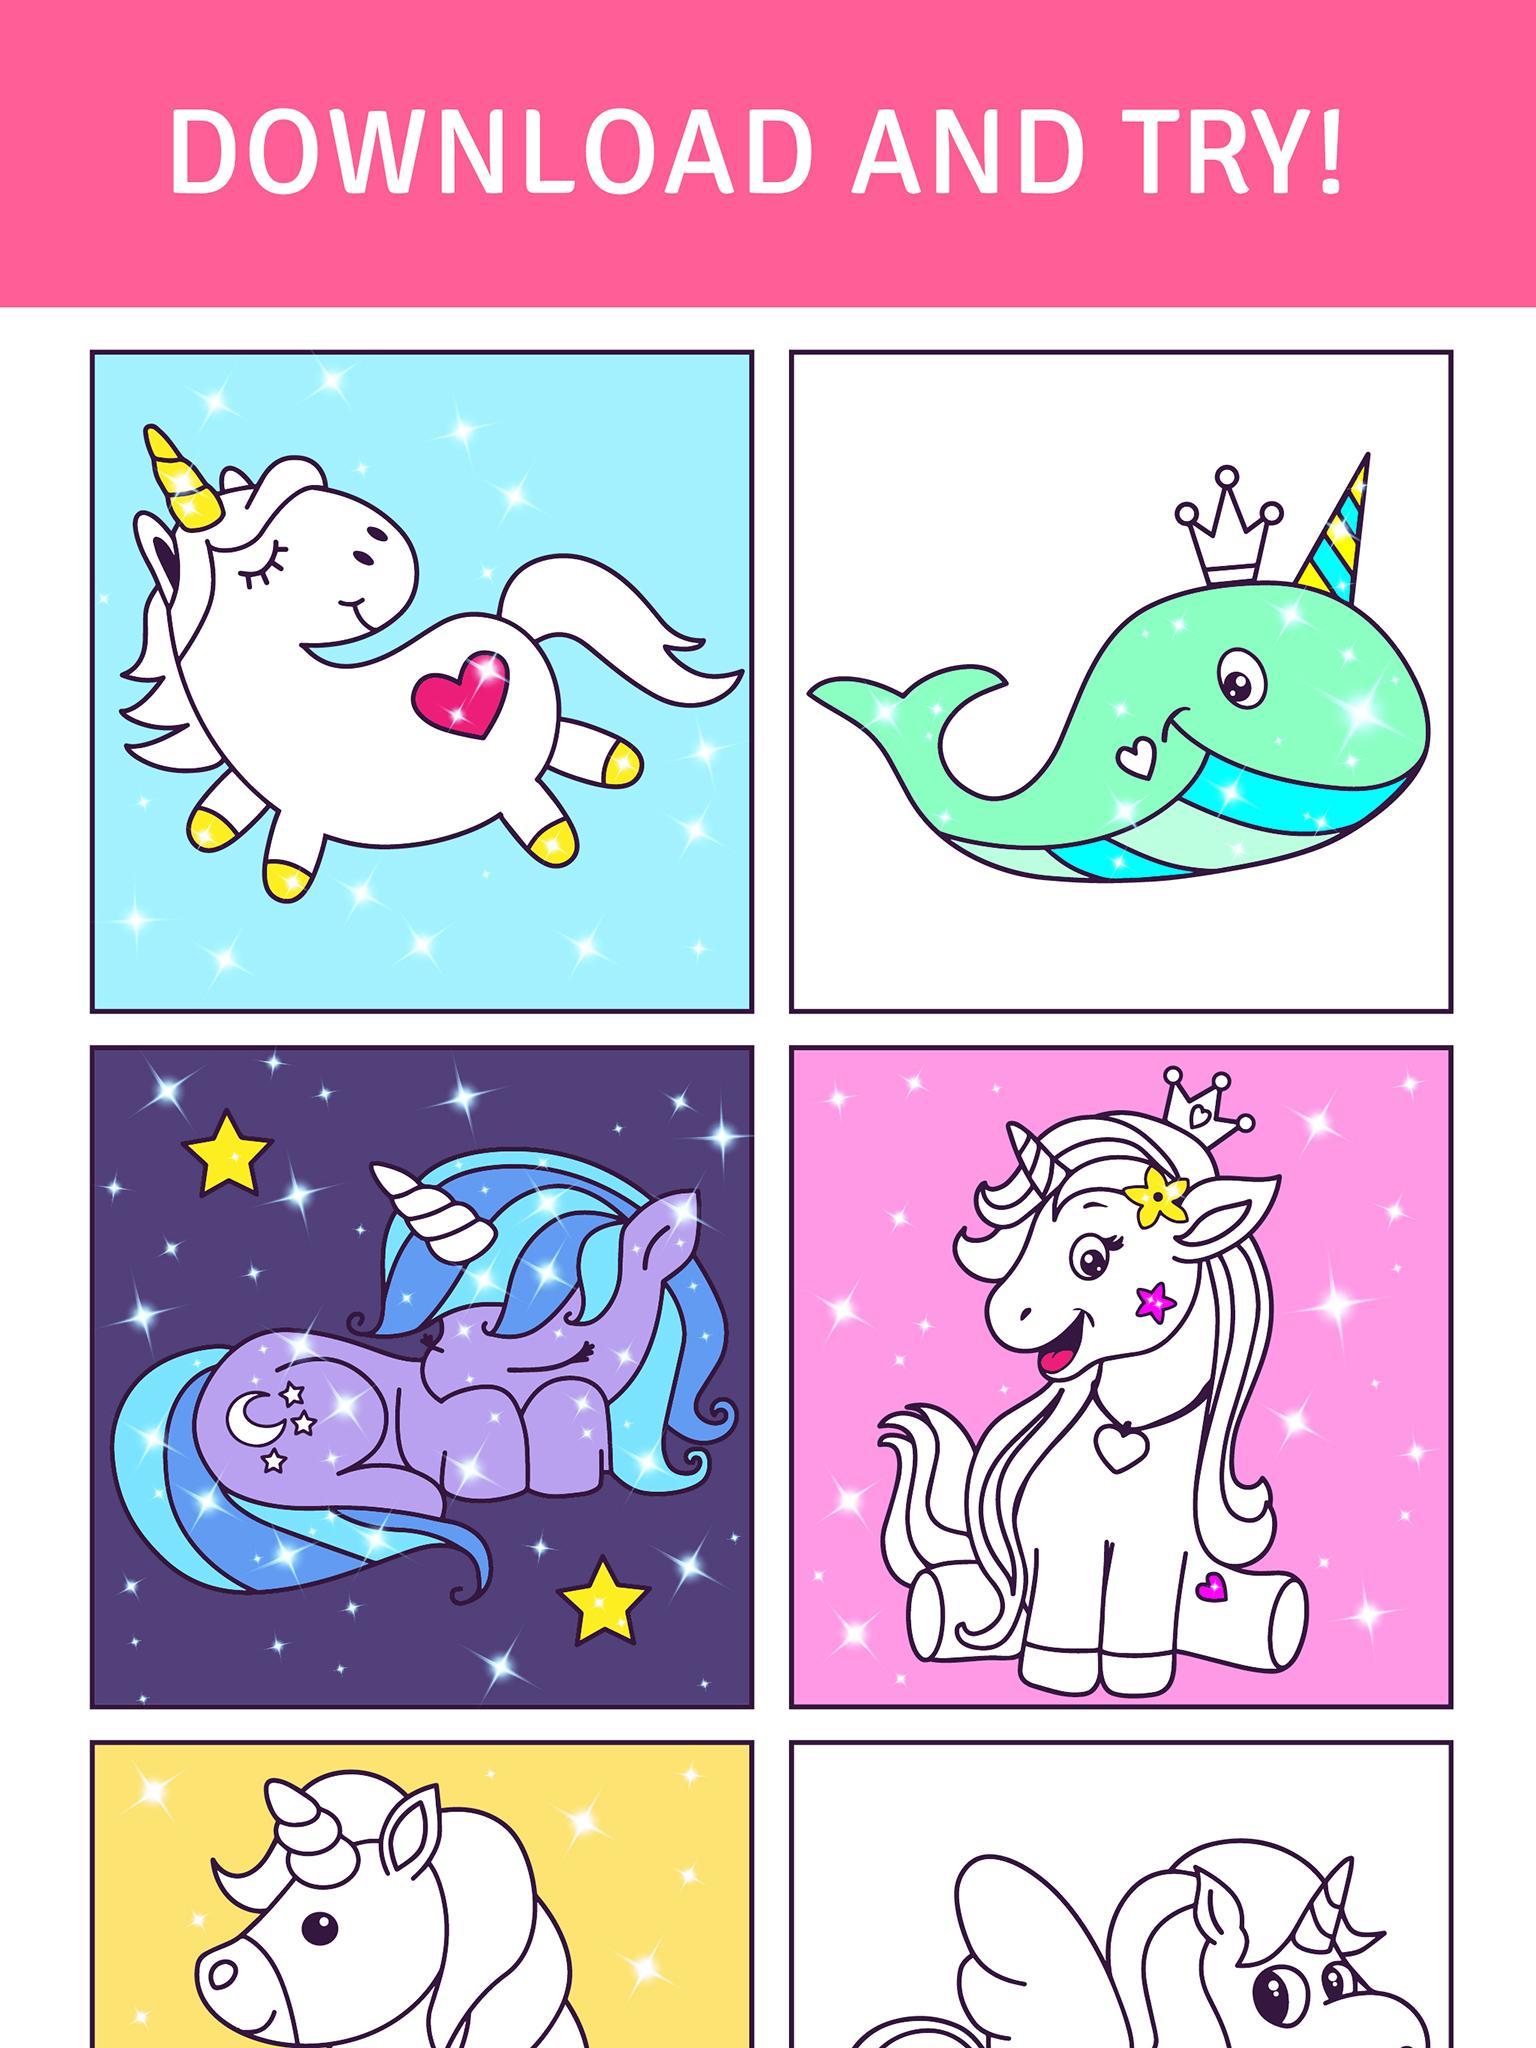 Animated Glitter Coloring Book - My Little Unicorn for Android - APK